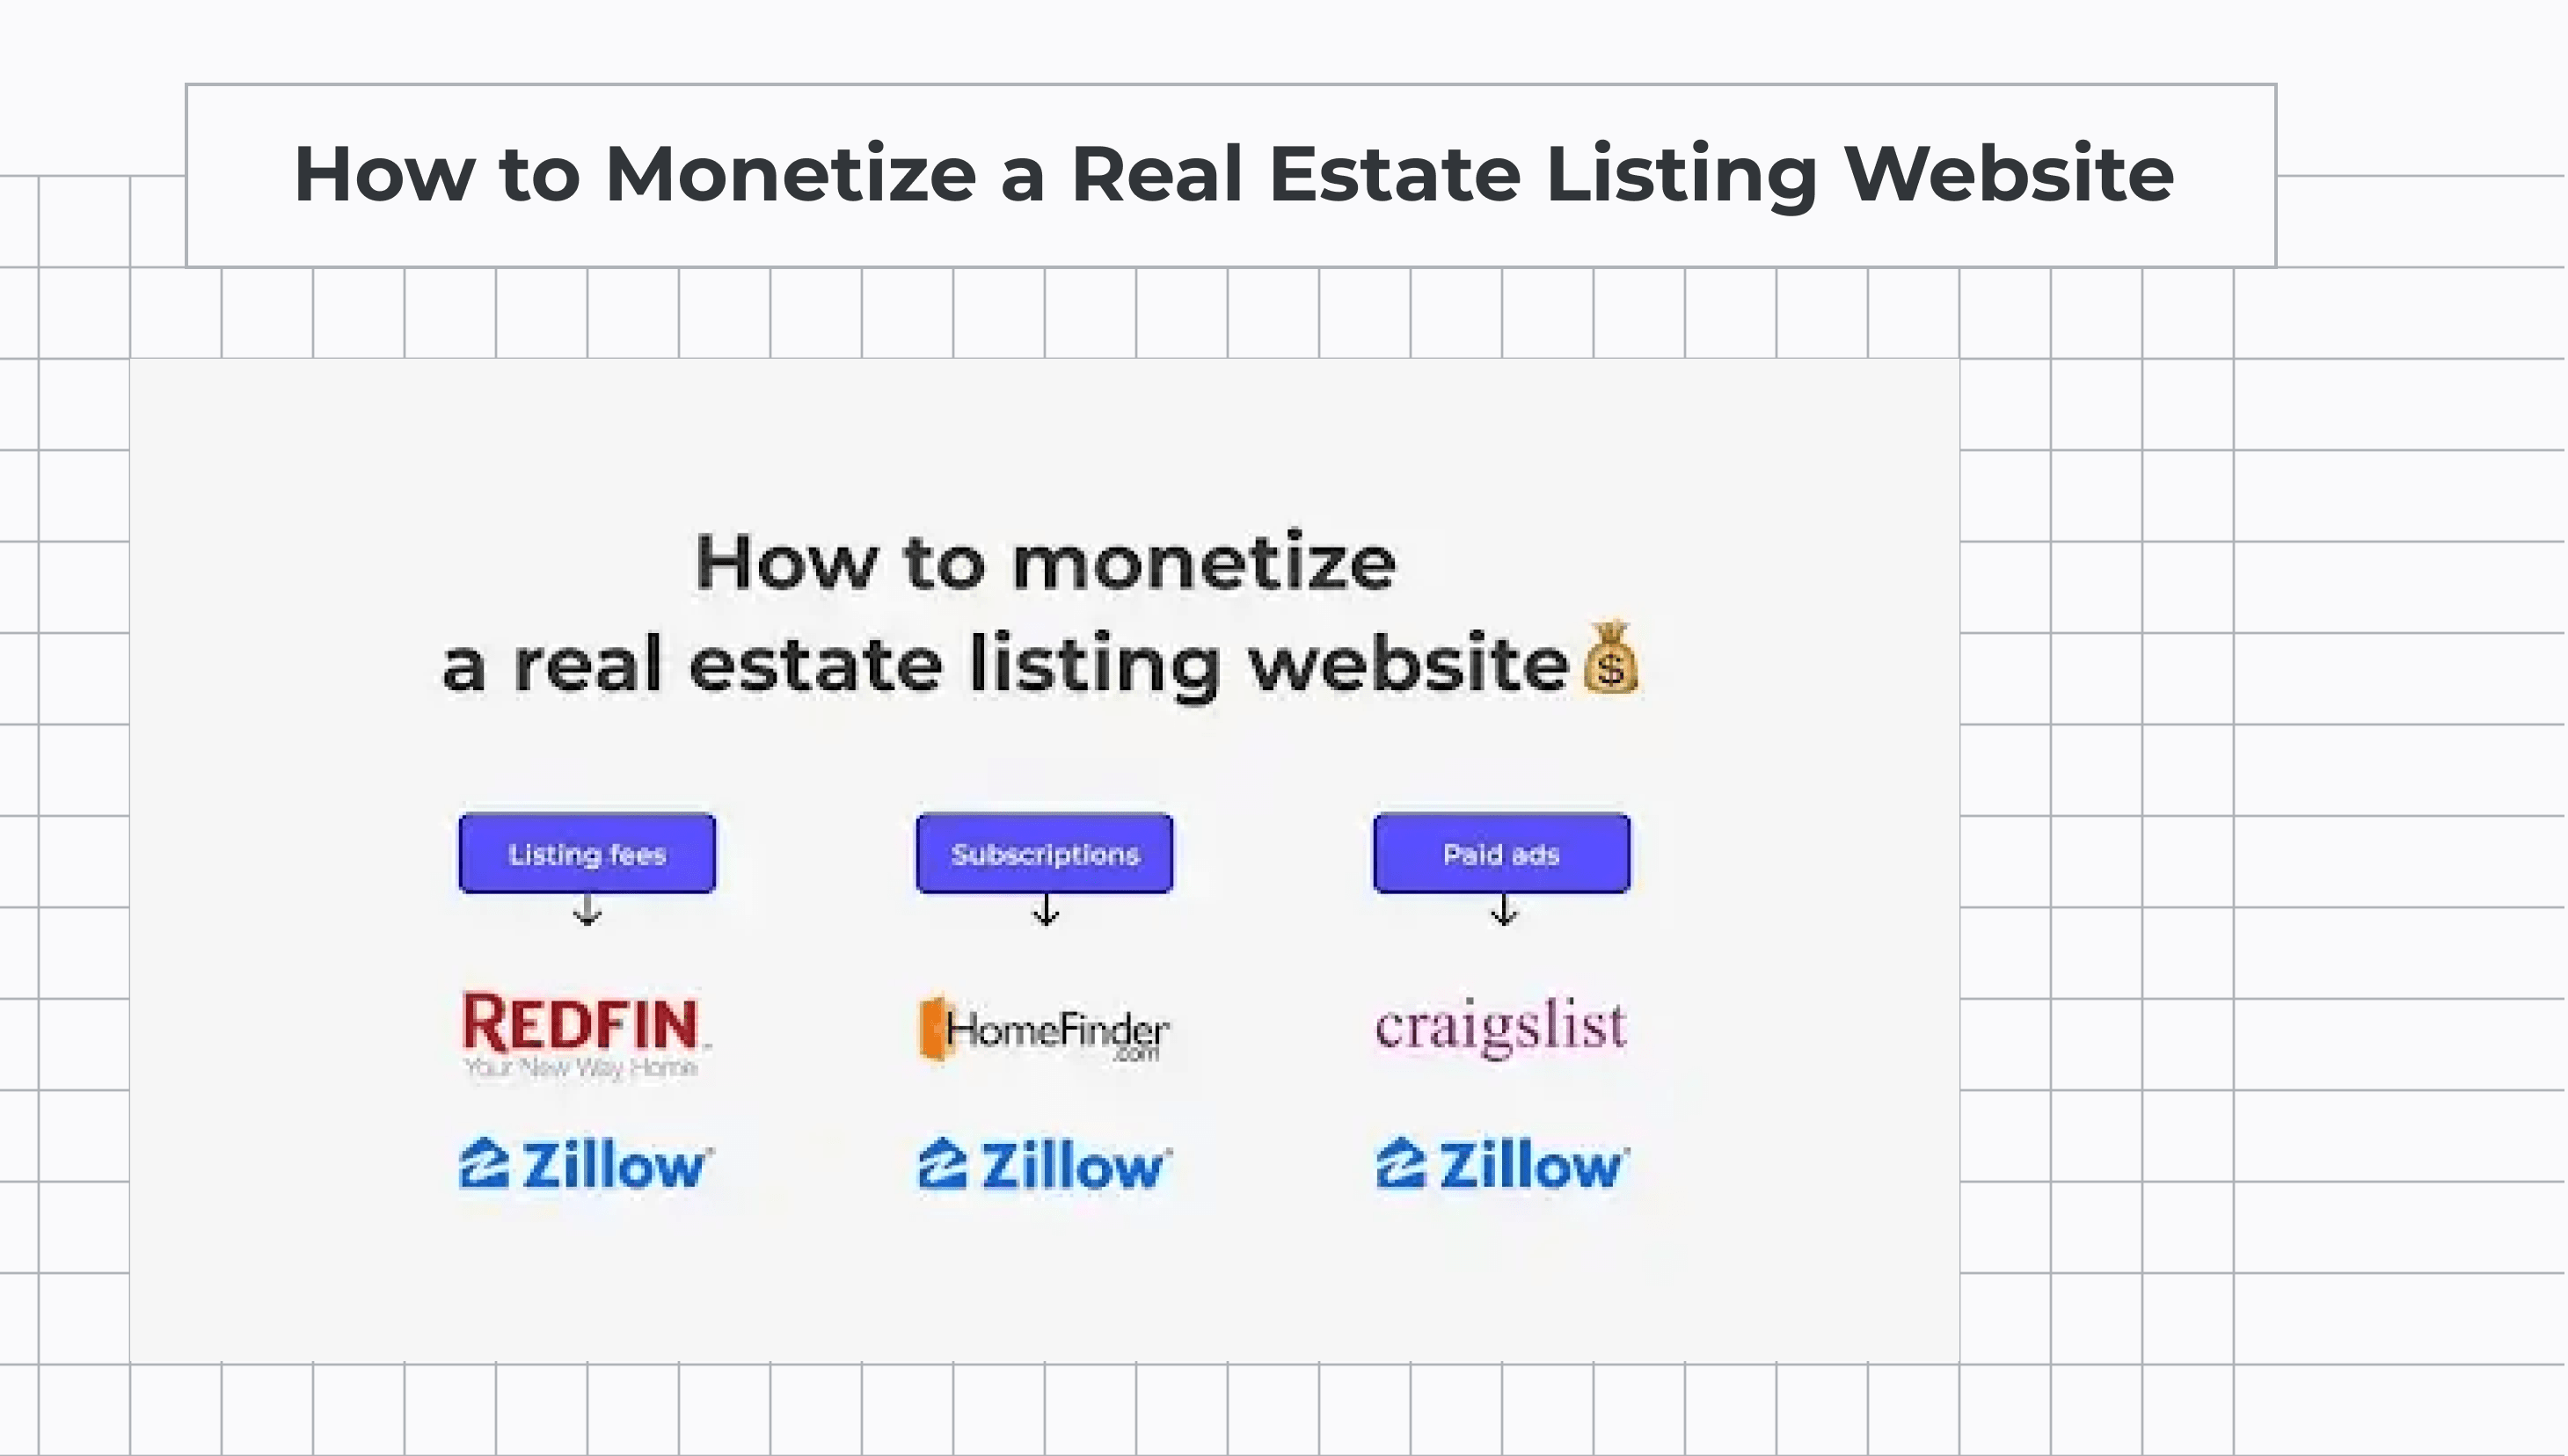 How to Monetize a Real Estate Listing Website